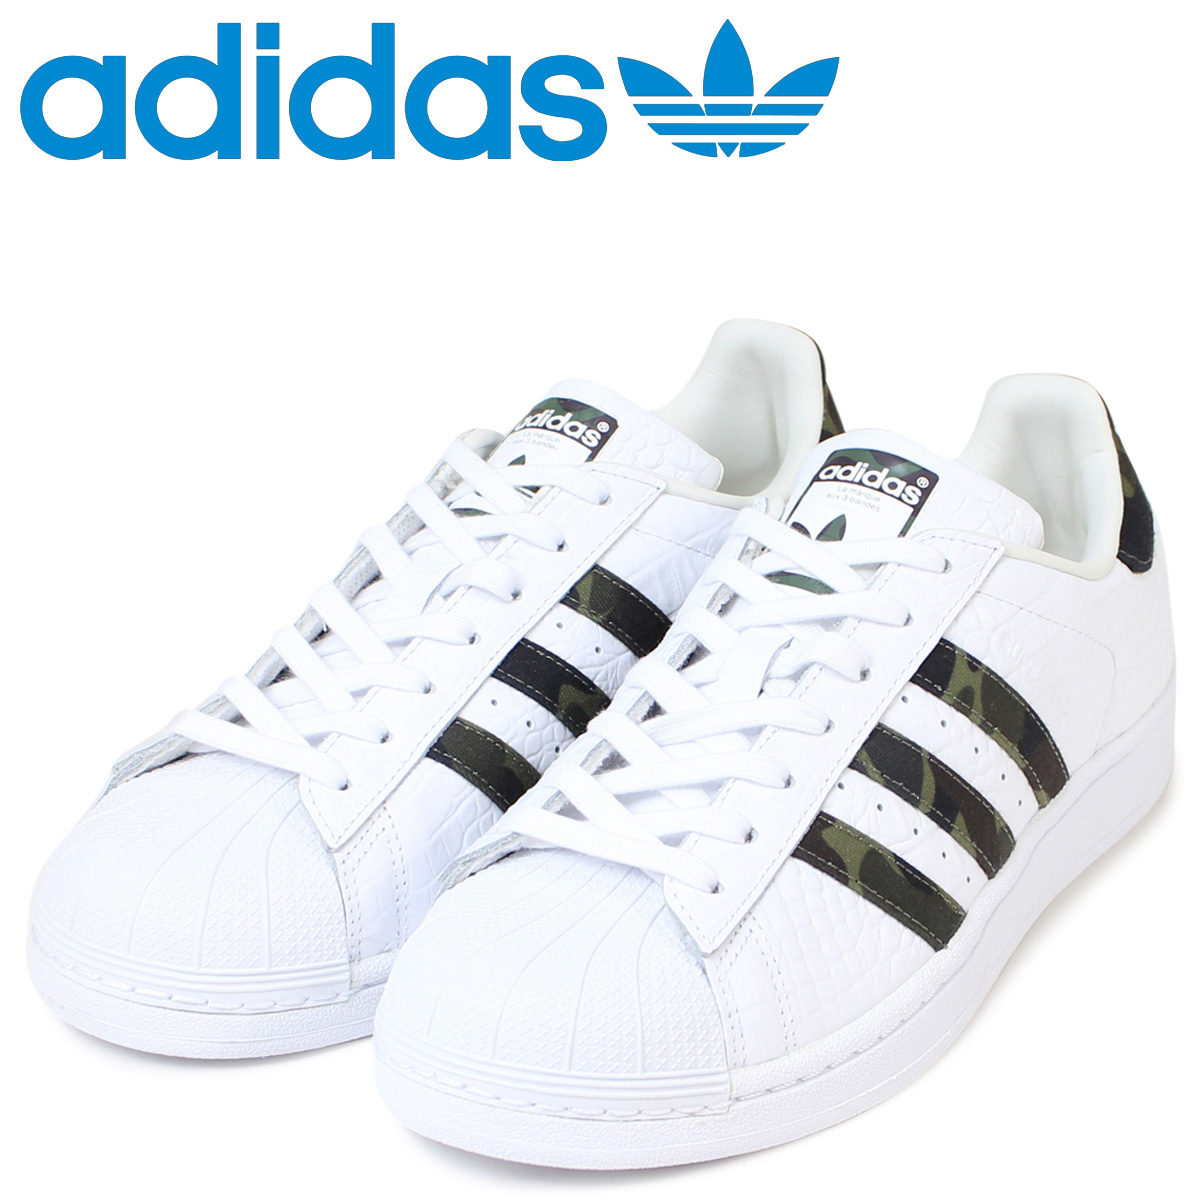 adidas superstar shoes price in qatar off 67% - icrating.se